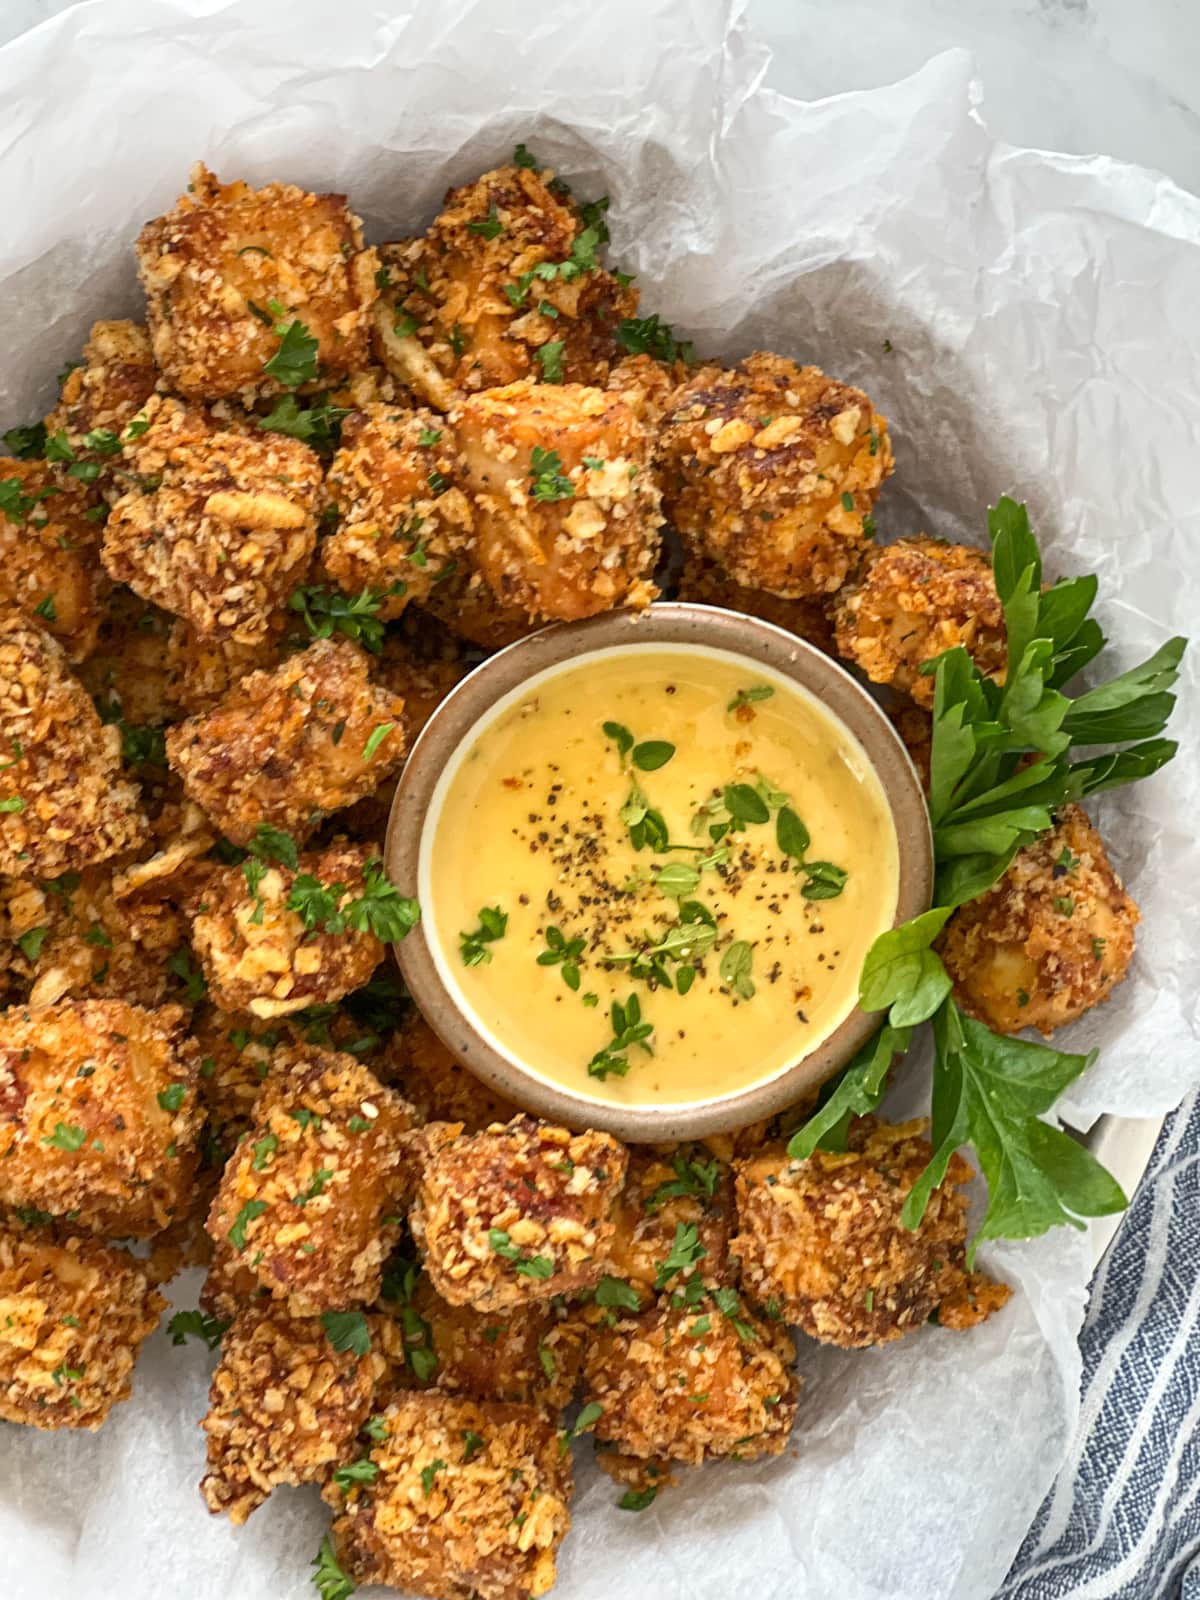 Bowlful of crunchy breaded tofu nuggets with a bowl of honey mustard sauce.